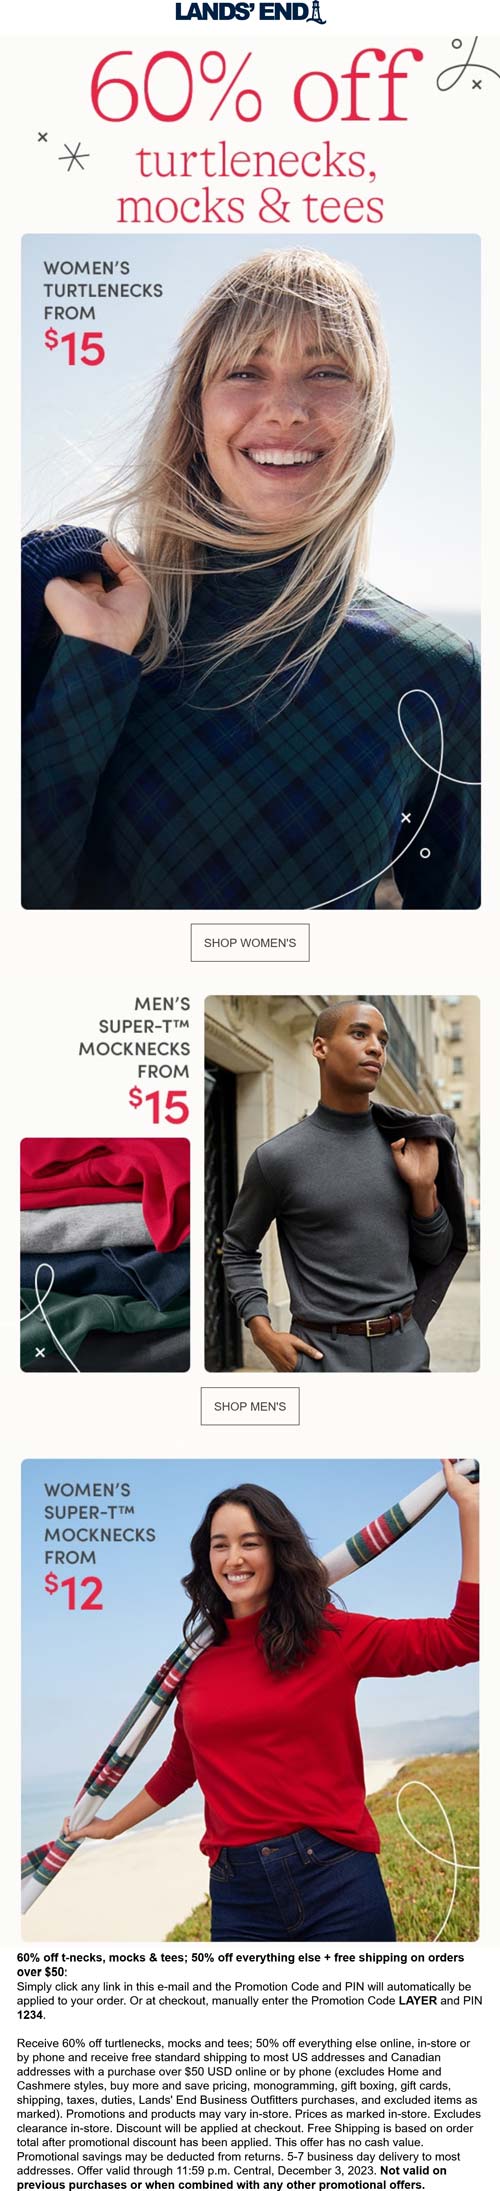 50-60% off everything today at Lands End via promo code LAYER and pin 1234 #landsend, or online via promo code #landsend